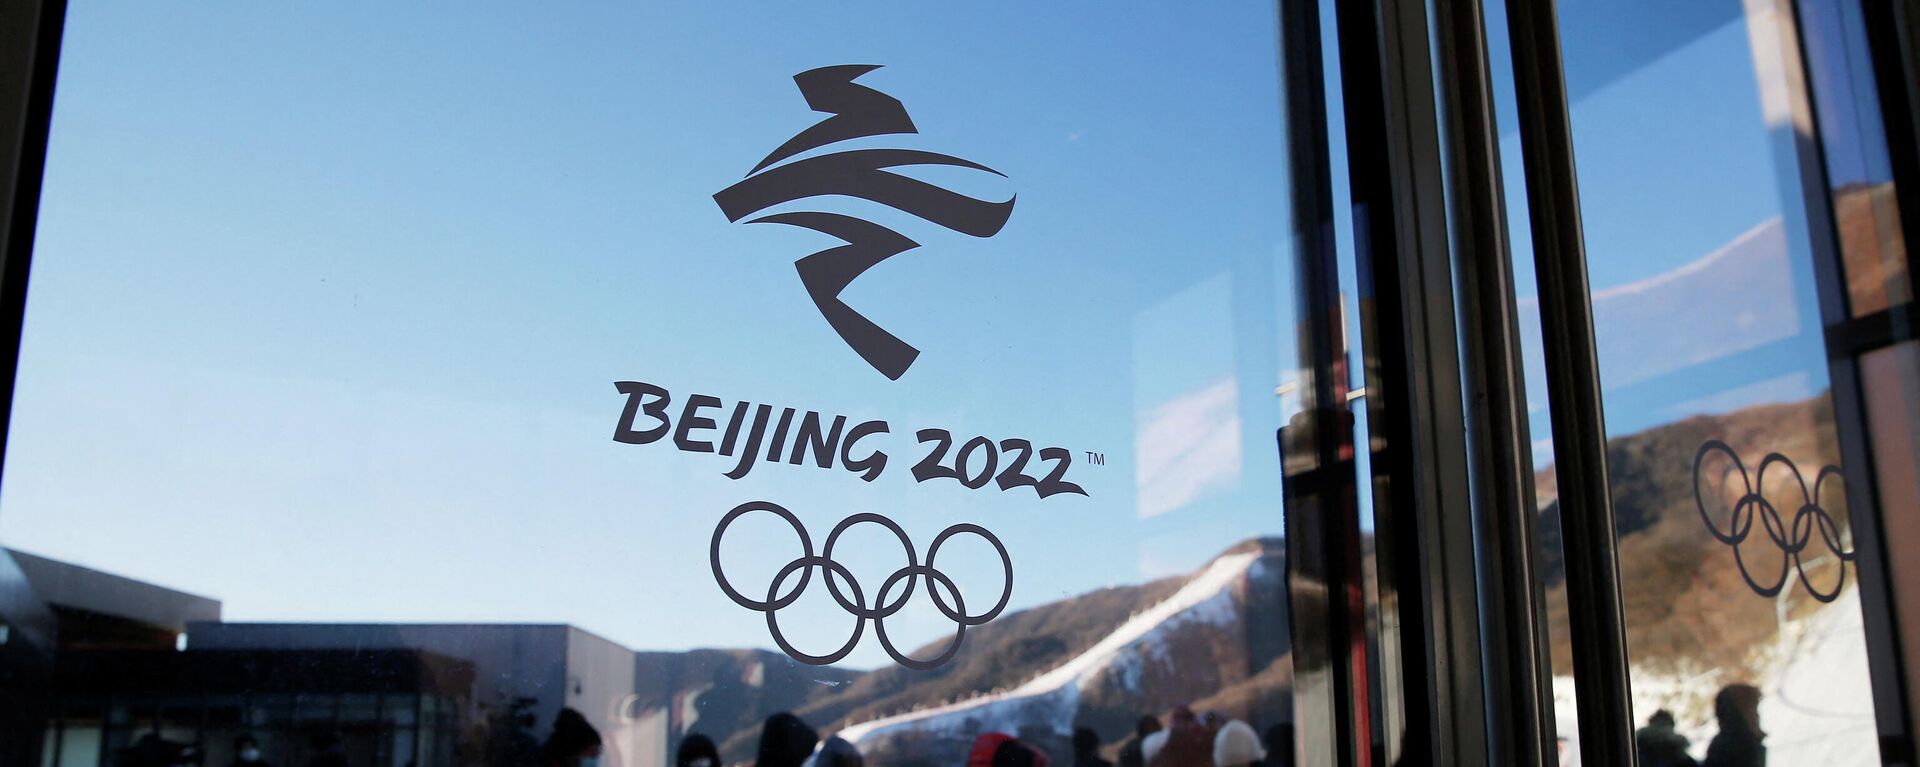 The emblem of Beijing 2022 Winter Olympics is seen on a glass door at the National Alpine Skiing Centre during an organised media tour to the Olympic venues in Yanqing district of Beijing, China December 17, 2021 - Sputnik International, 1920, 23.12.2021